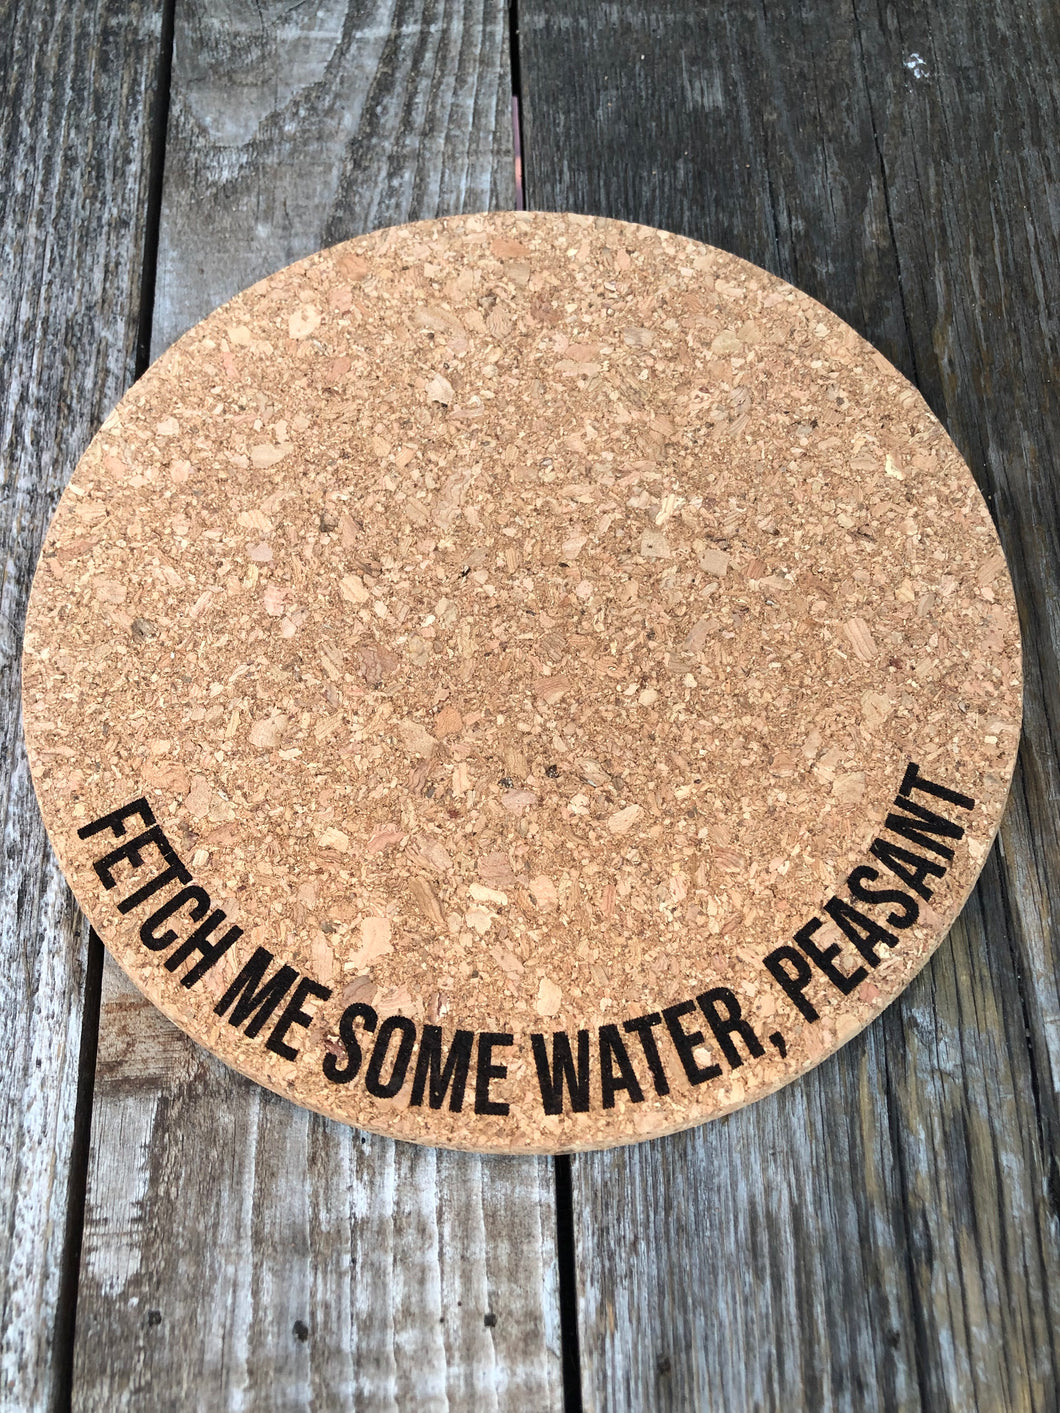 Fetch Me Some Water, Peasant Cork Plant Mat - Engraved Cork Round - Cork Bottom - No Plastic or Rubber - All Natural Material